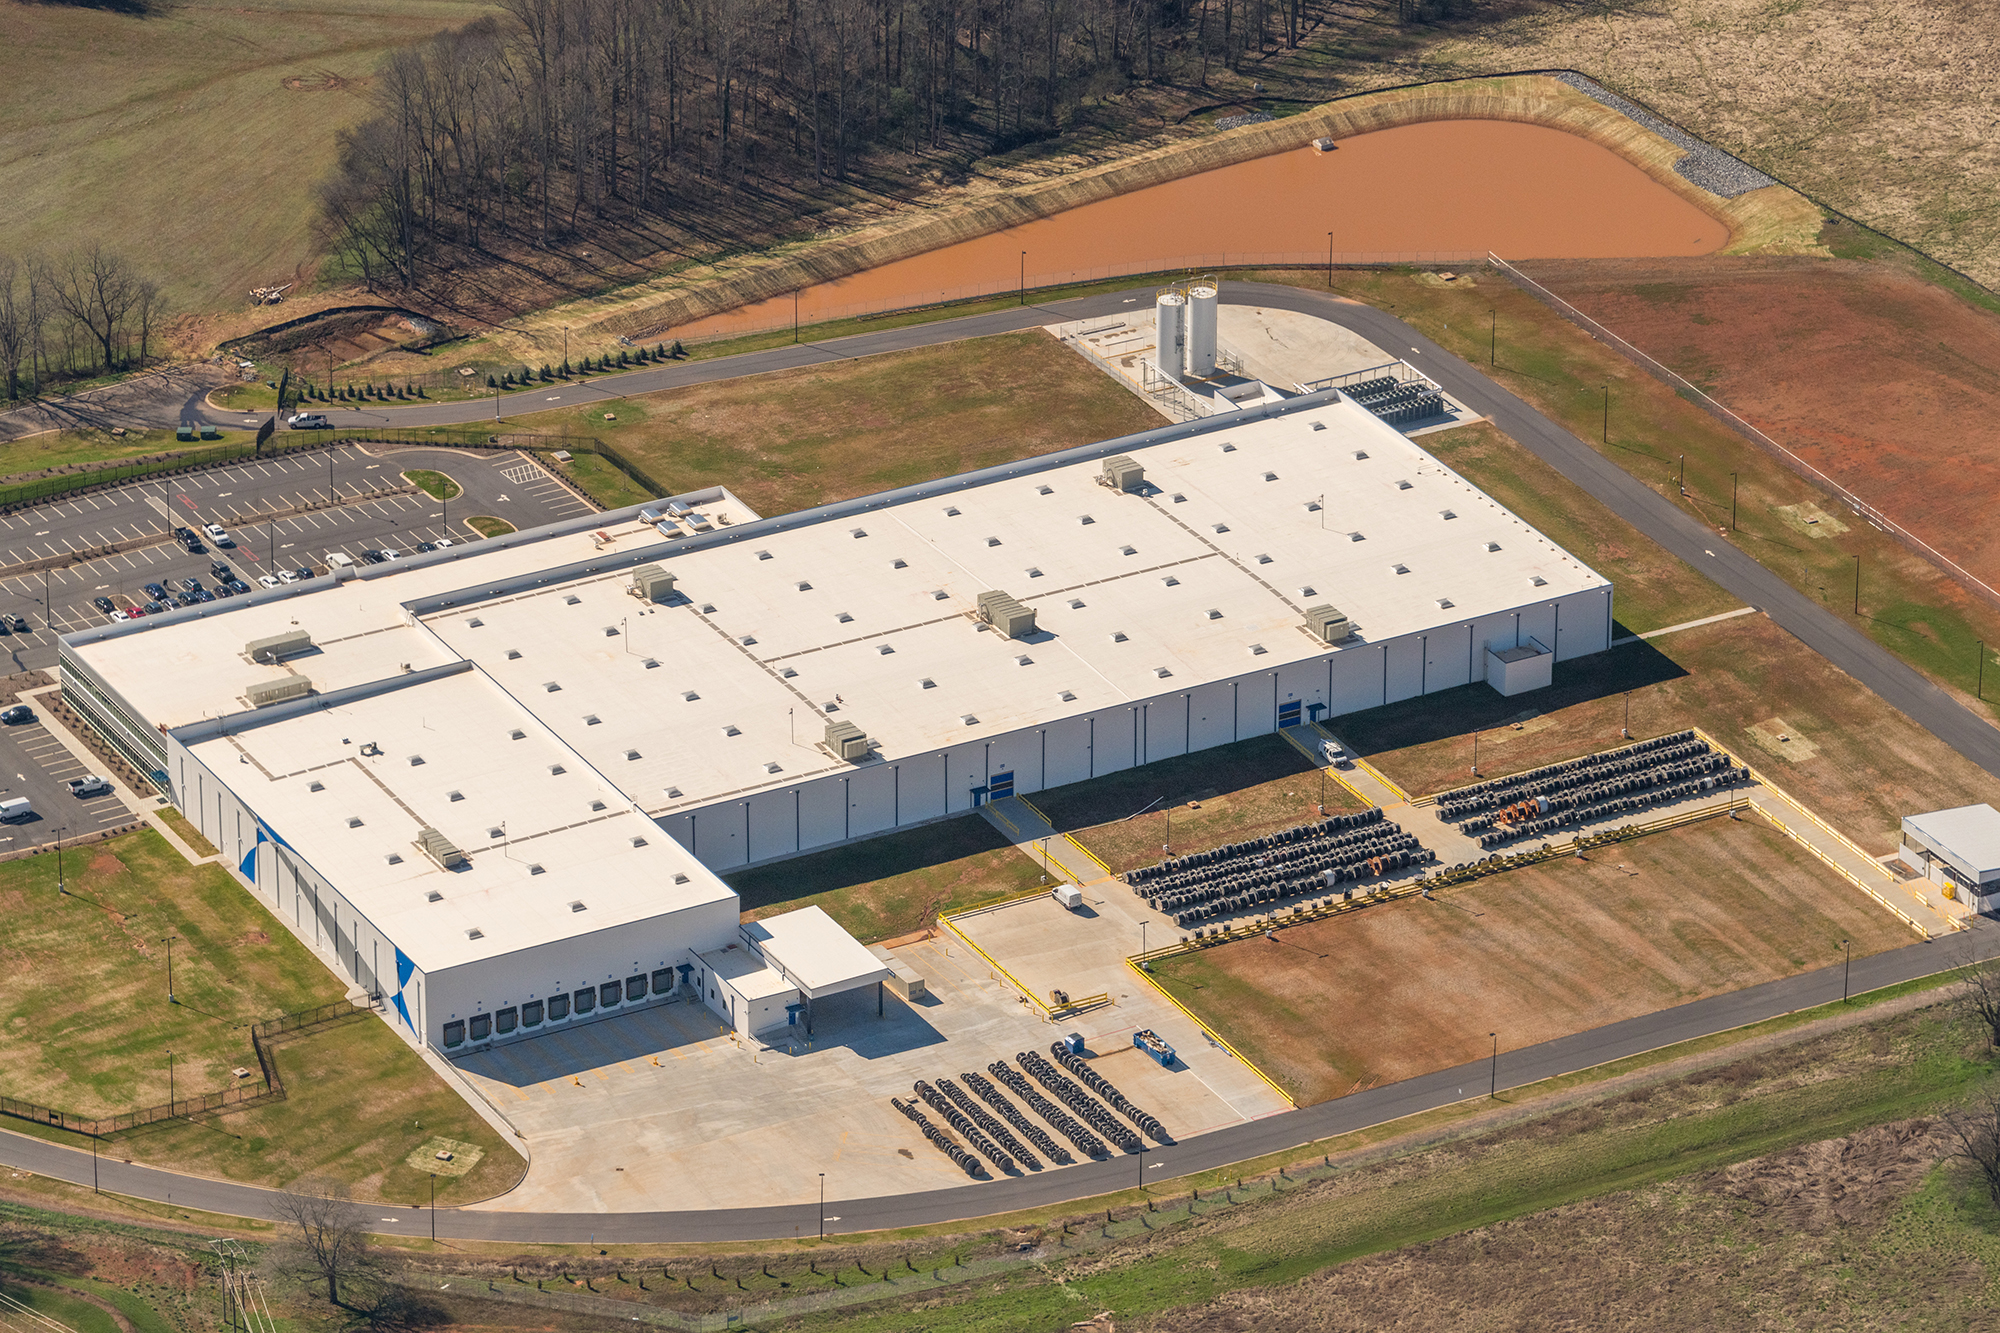 An aerial view of a large distribution warehouse, parking lots, and detention ponds